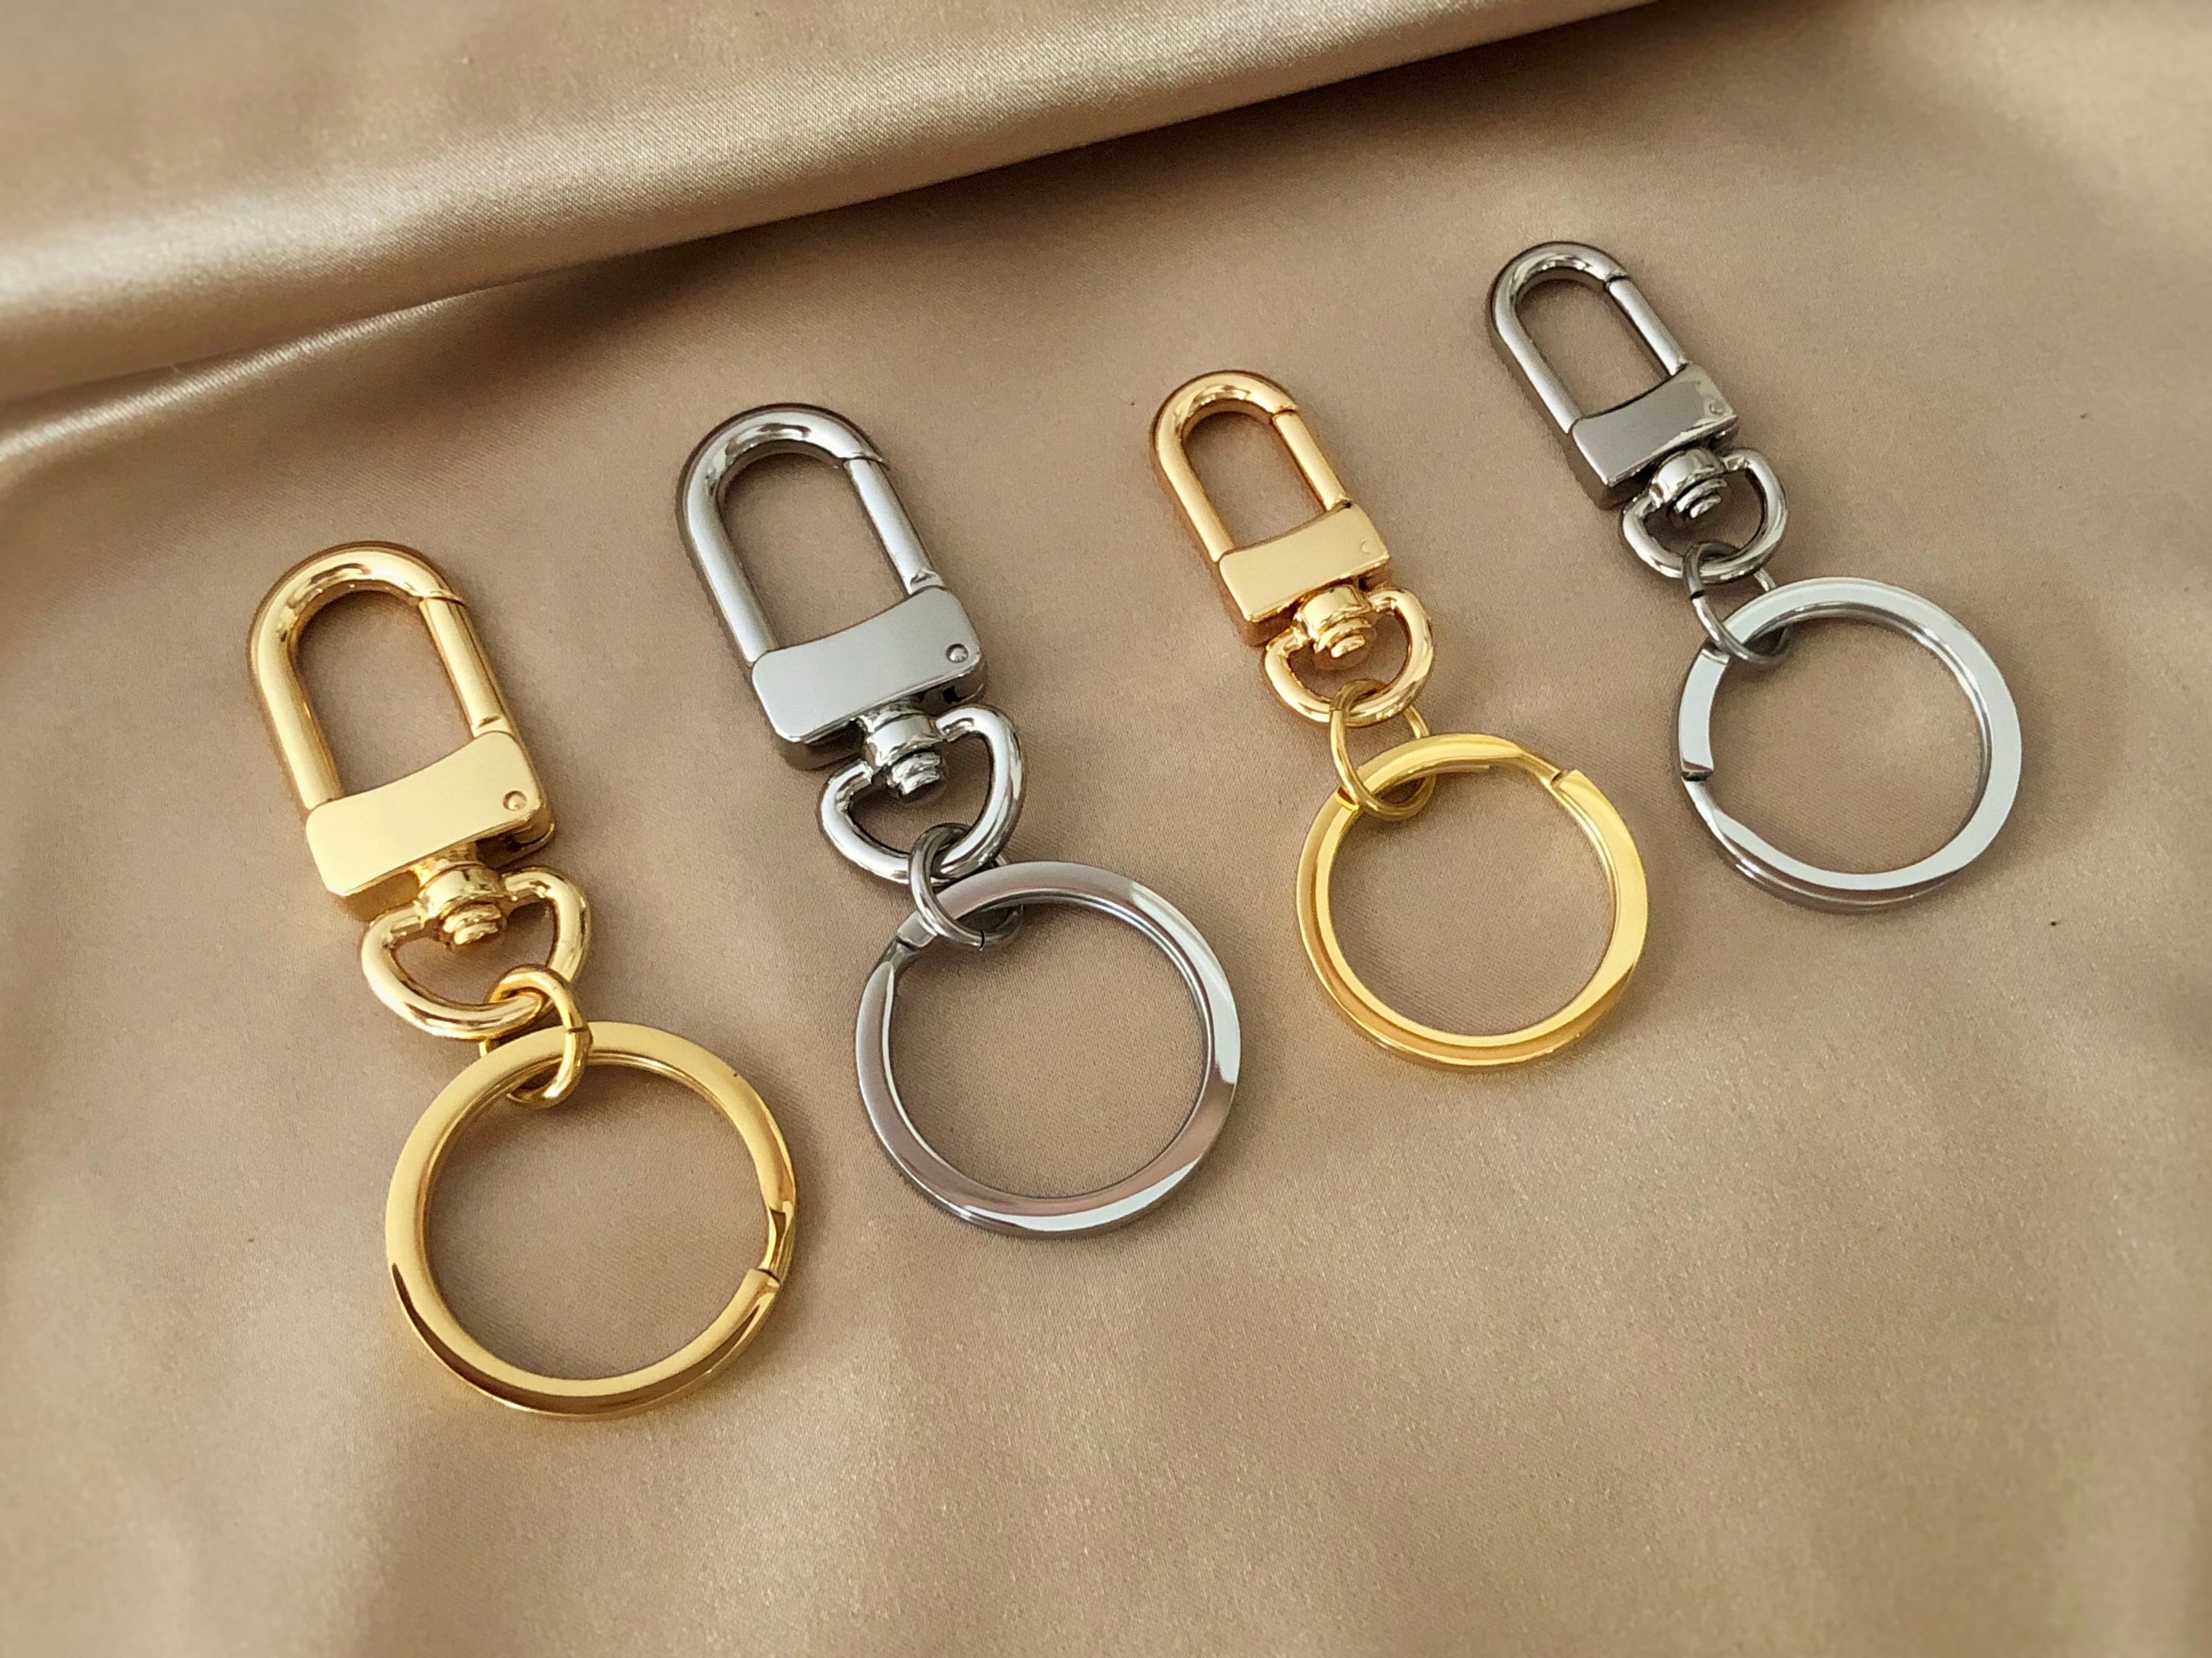 5pcs Key Chain for Keys, Lobster Claw Clasps Keychain for DIY, Gold